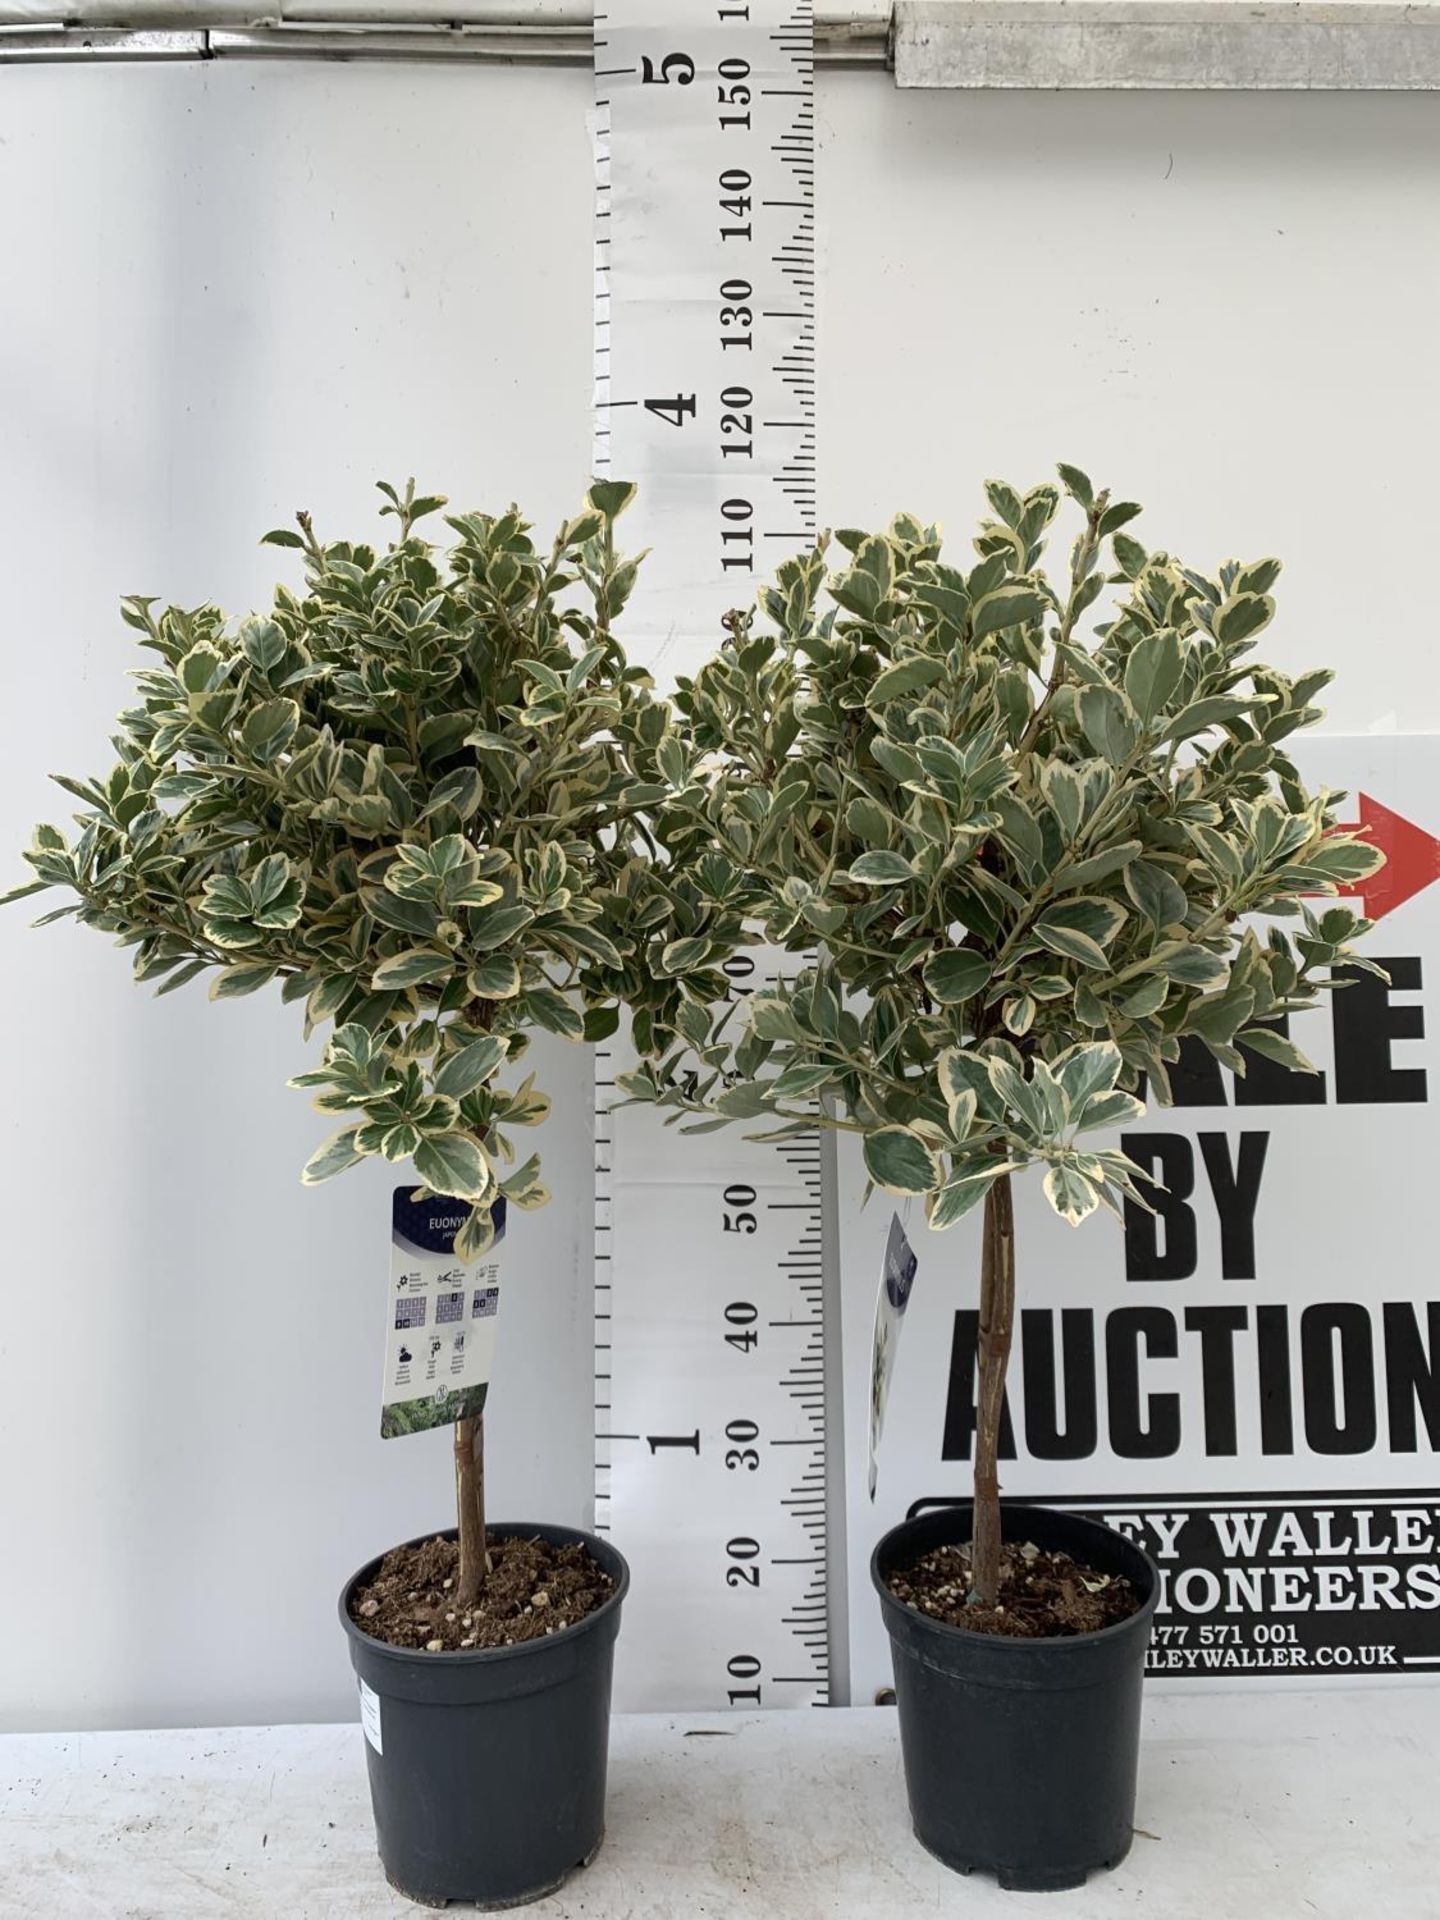 TWO EUONYMUS JAPONICUS STANDARD TREES APPROX 110CM IN HEIGHT IN 5 LTR POTS PLUS VAT TO BE SOLD FOR - Image 4 of 10